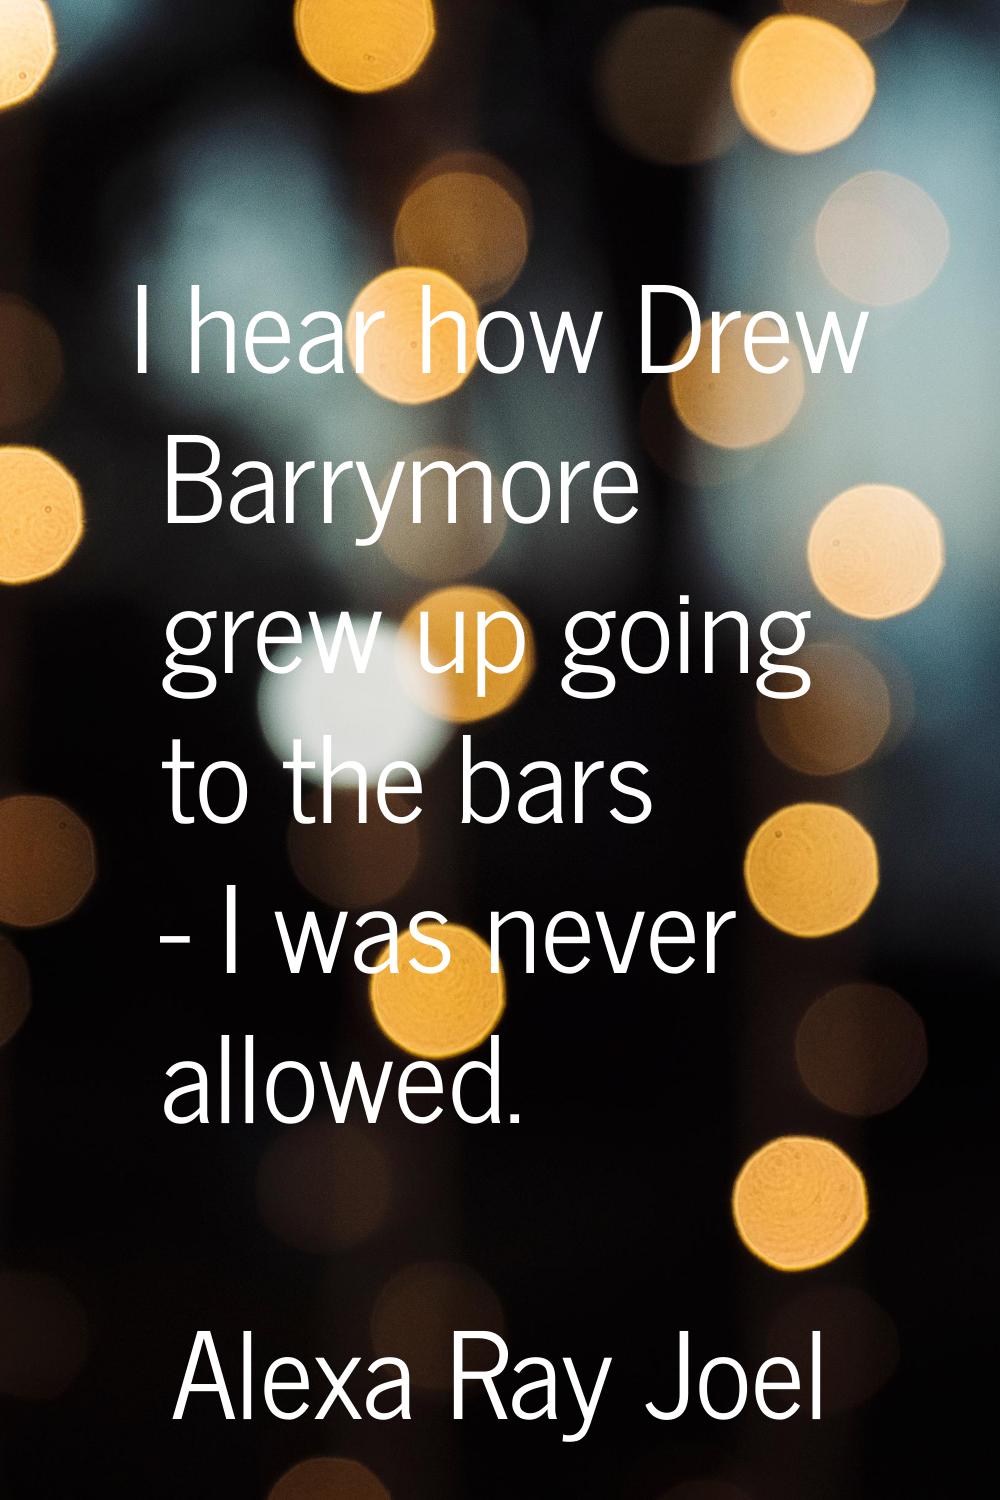 I hear how Drew Barrymore grew up going to the bars - I was never allowed.